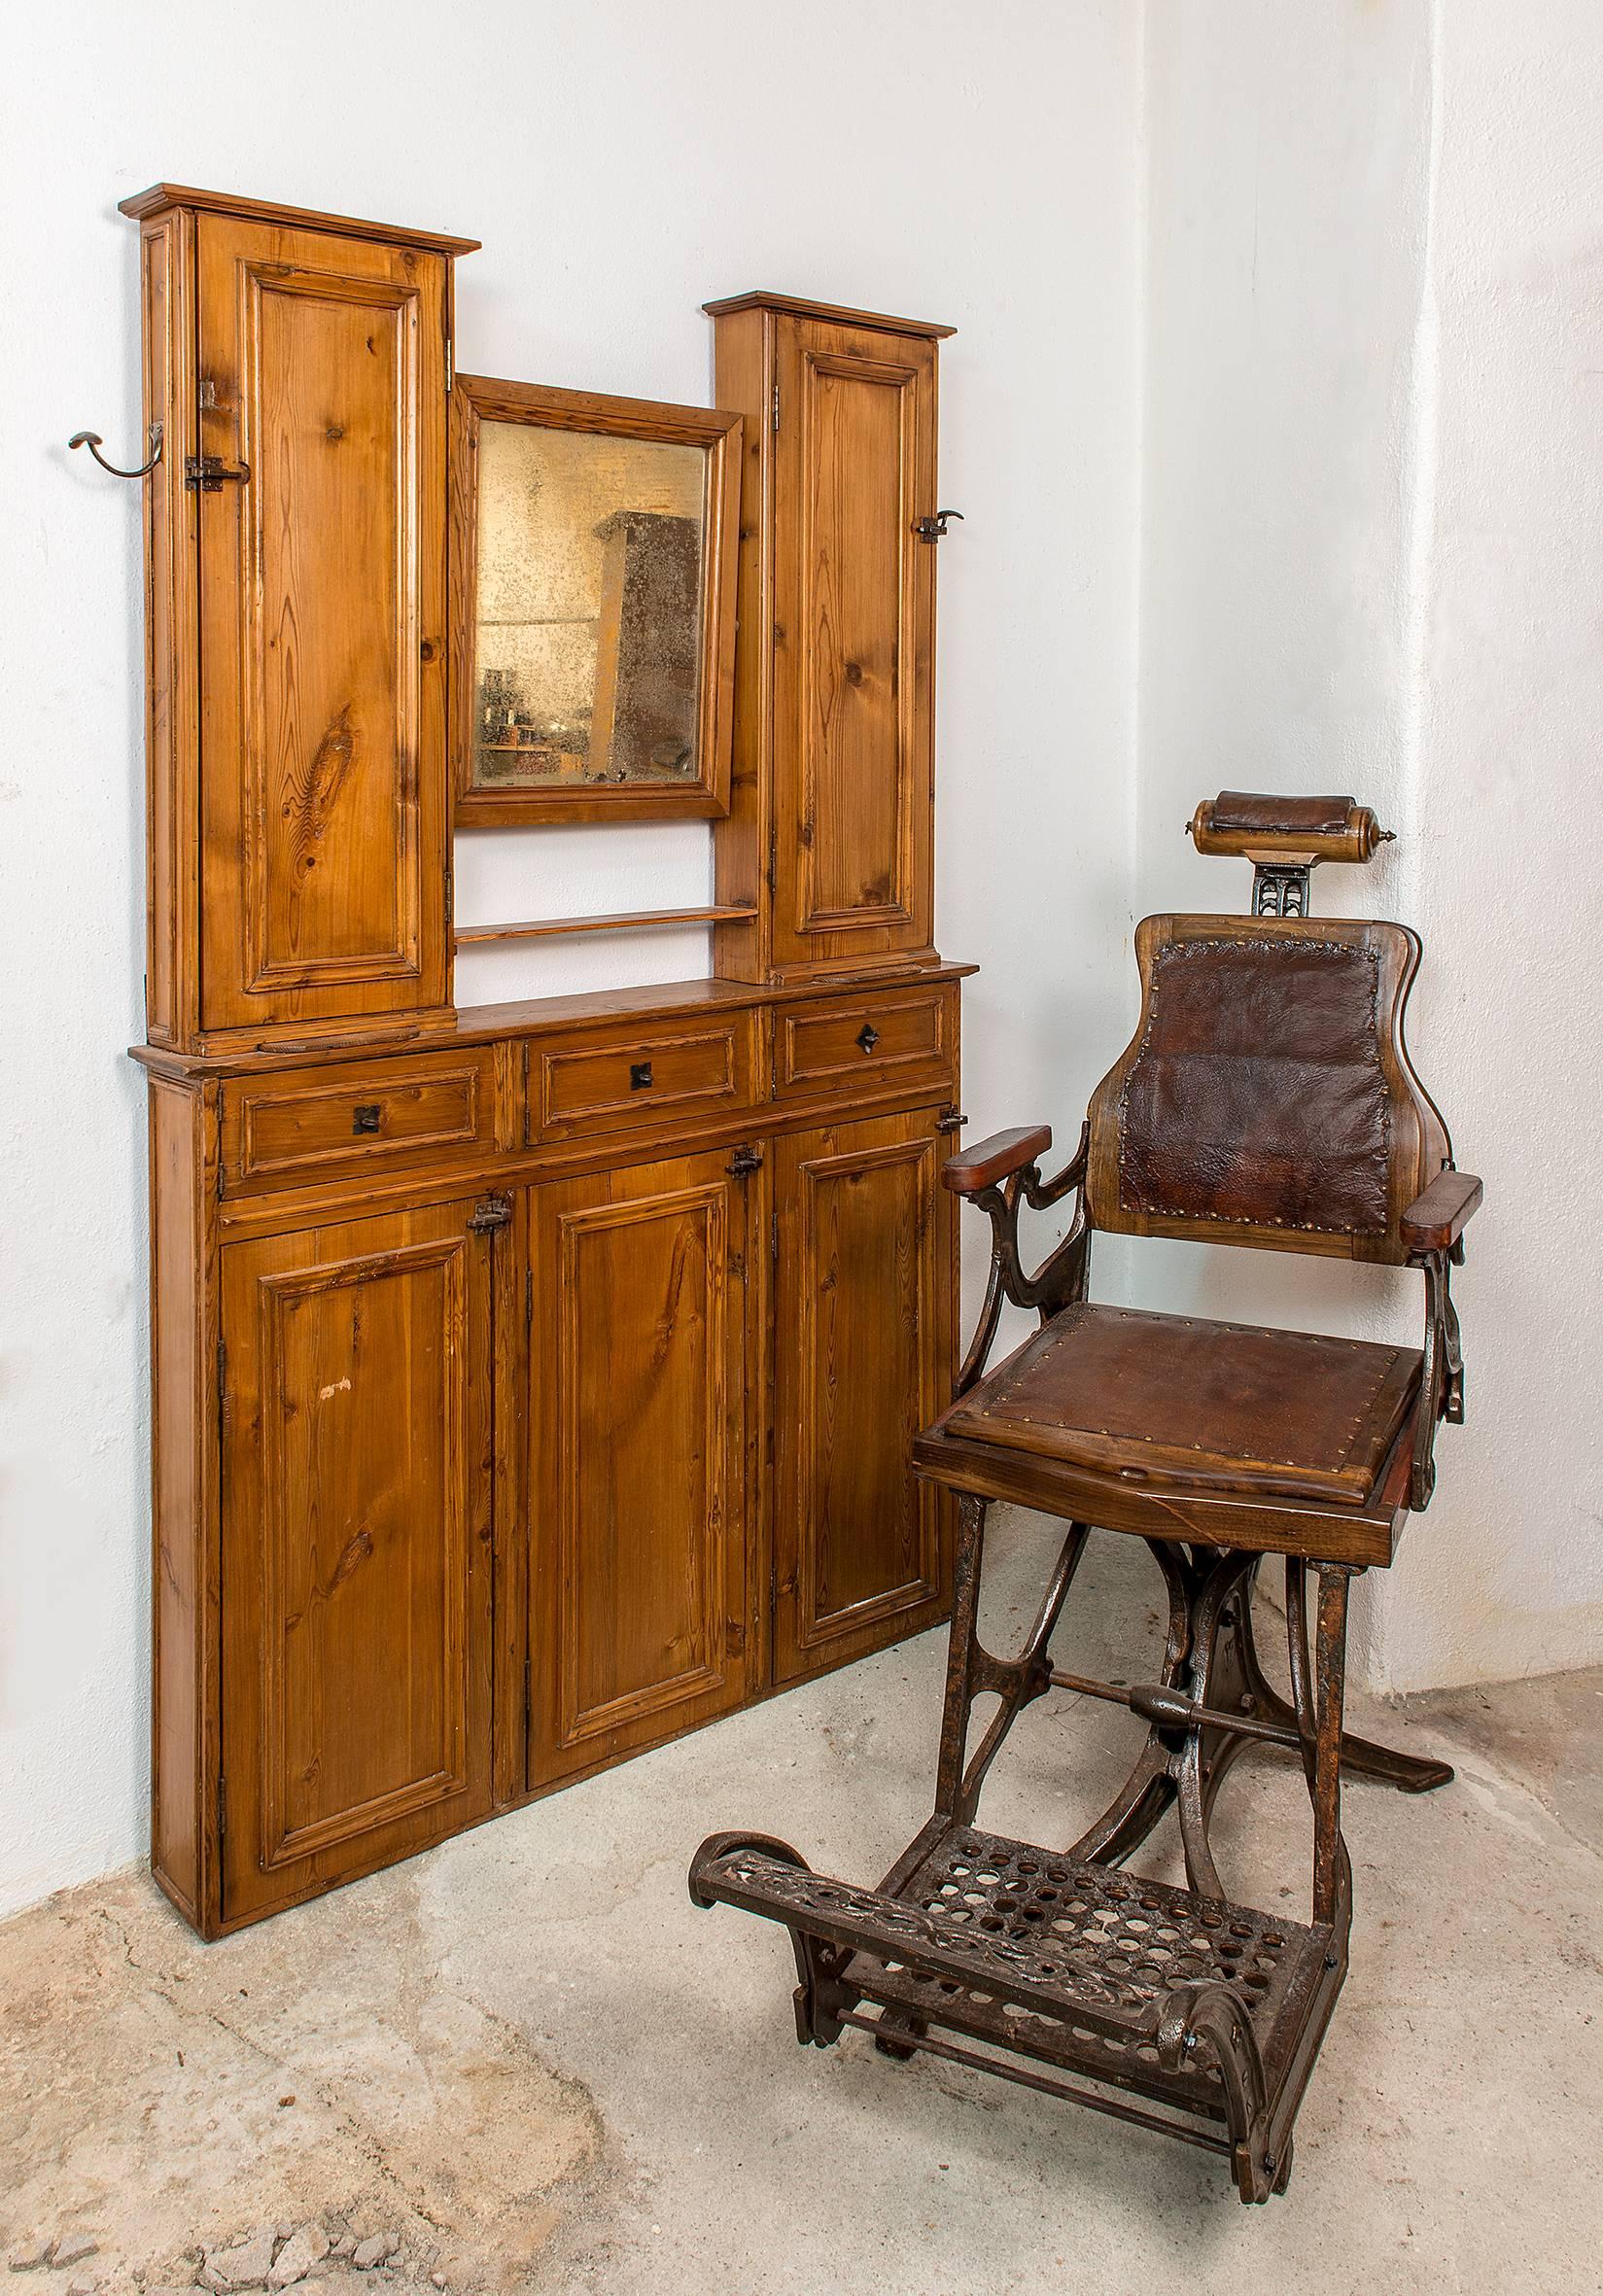 Early 20th century barber shop cabinet in wood, with mirror and storage.